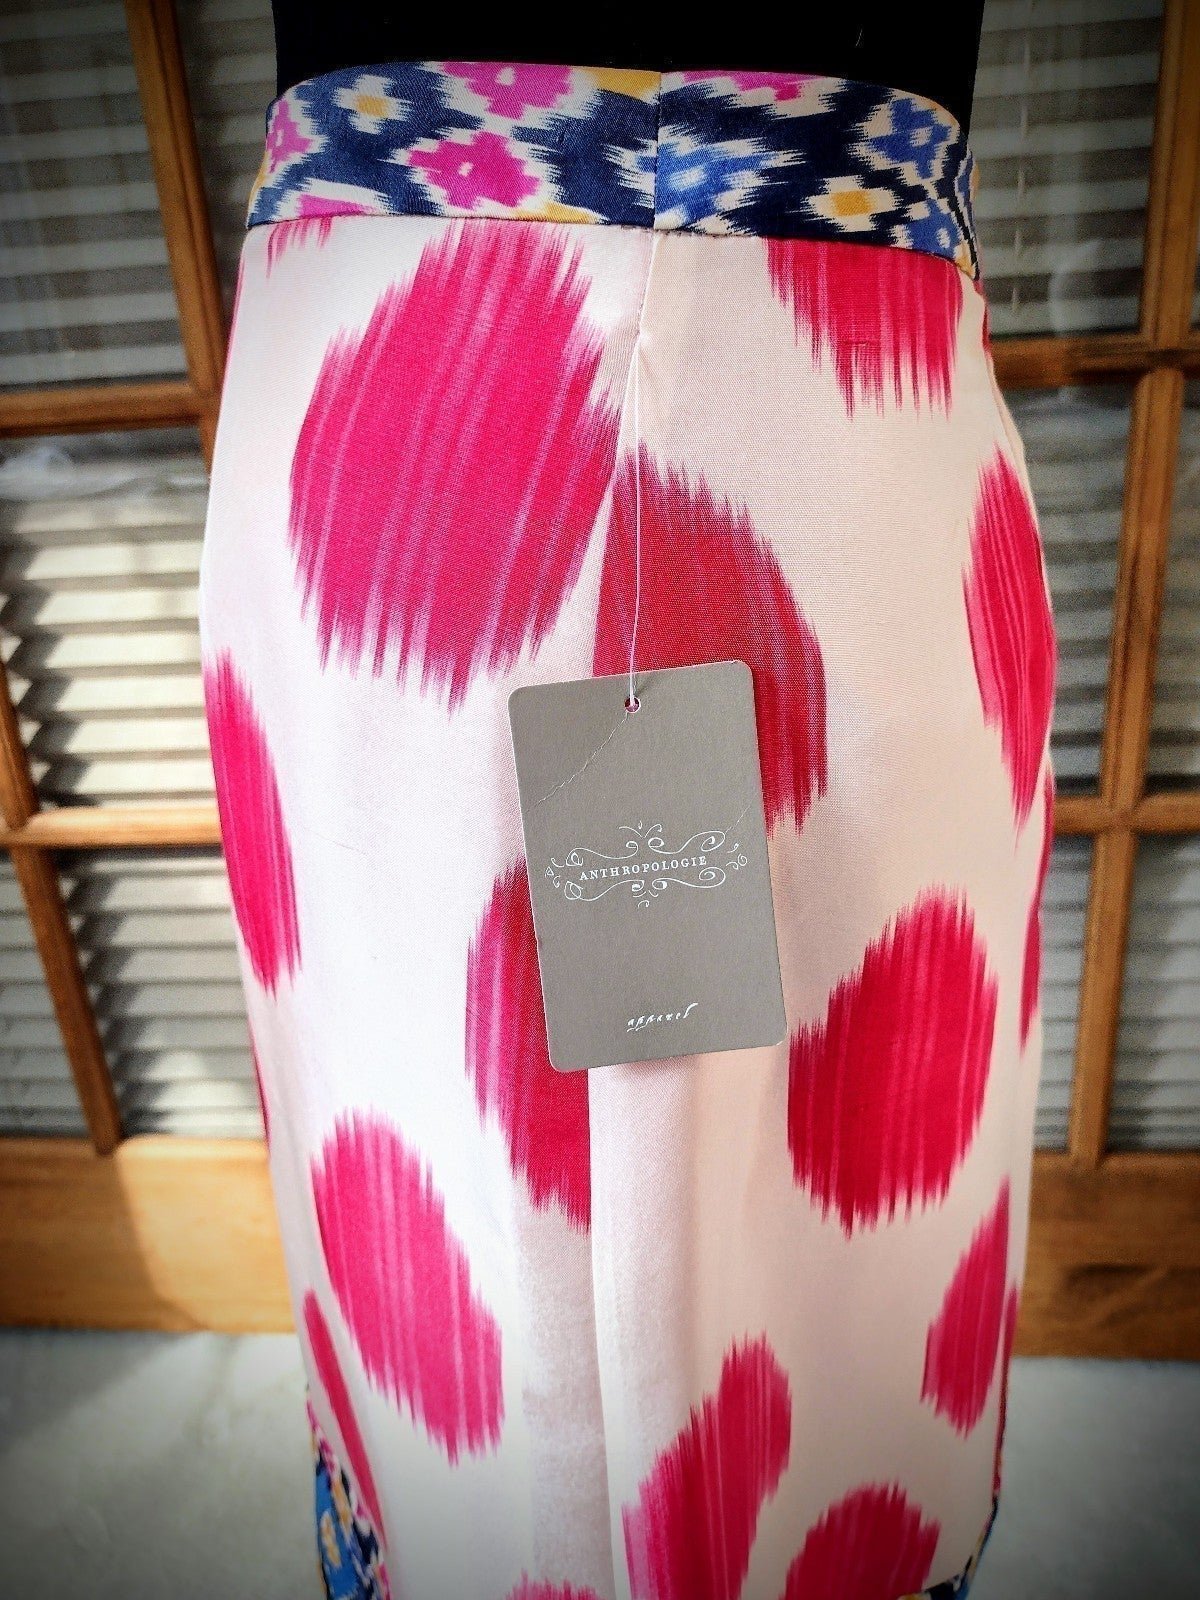 Exclusive NWT Anthropologie Maeve Fully Lined Skirt, Size 6, A-Line, $118 Retail JrT9OAFNI just buy it